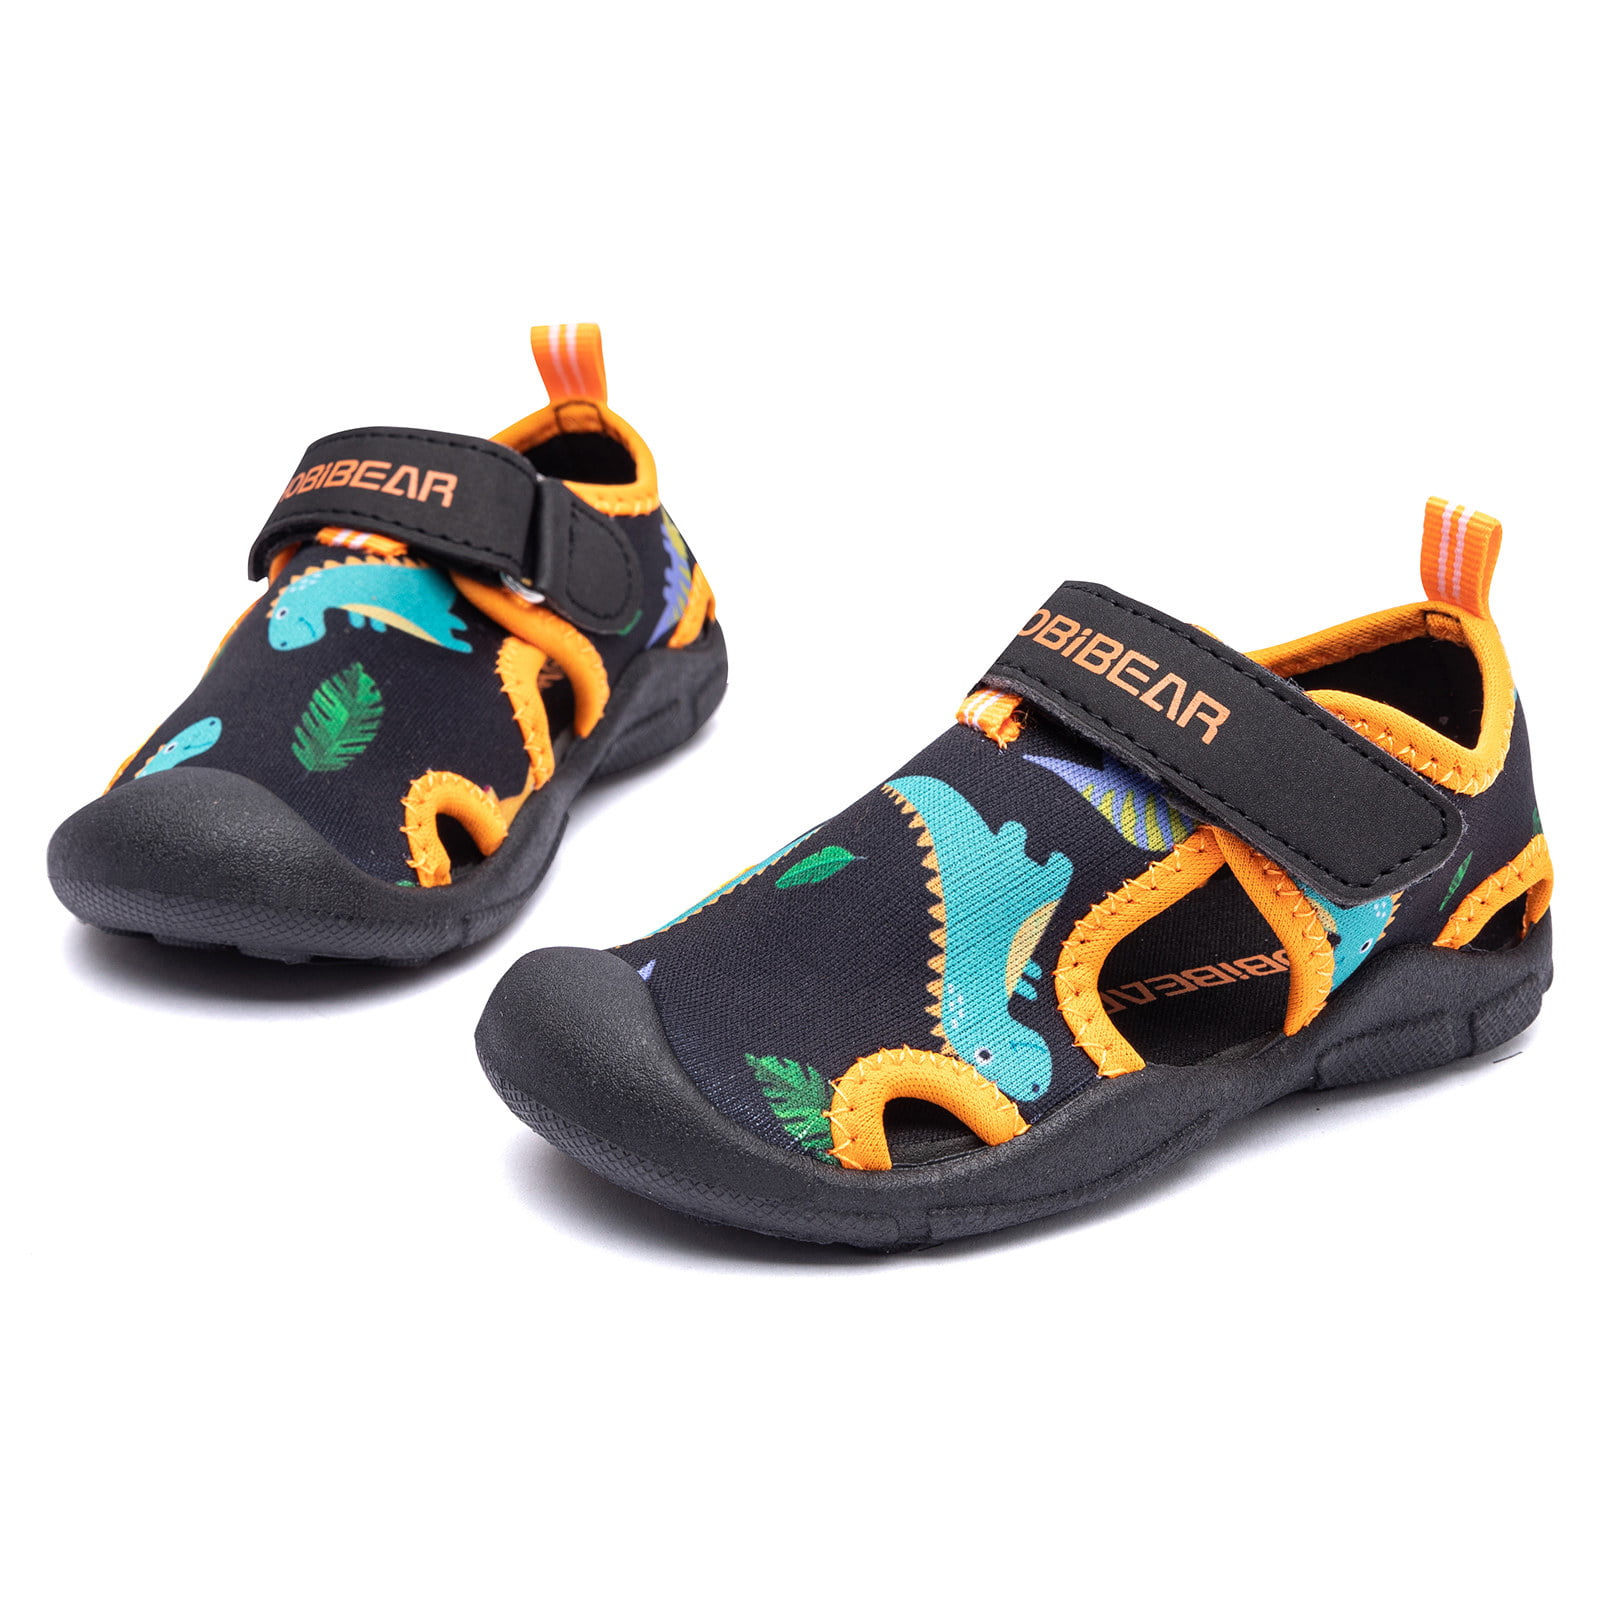 Boys Girls Water Shoes Quick Dry Closed-Toe Sport Sandals Toddler/Little Shoes